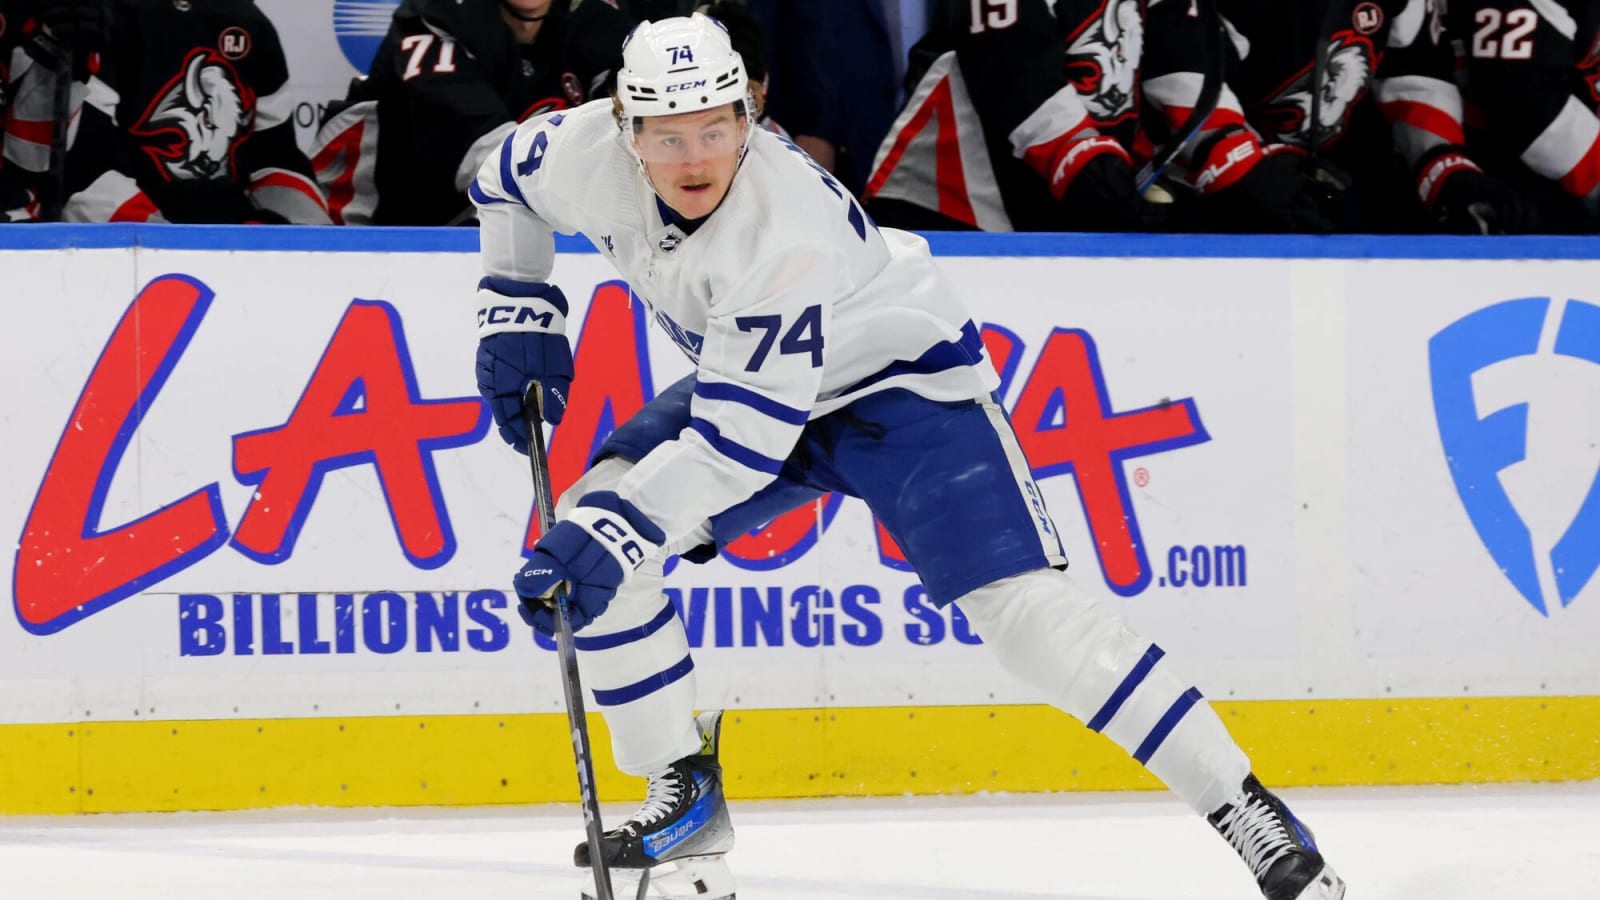 McMann & Knies Add Size, Power & Work Ethic to Maple Leafs